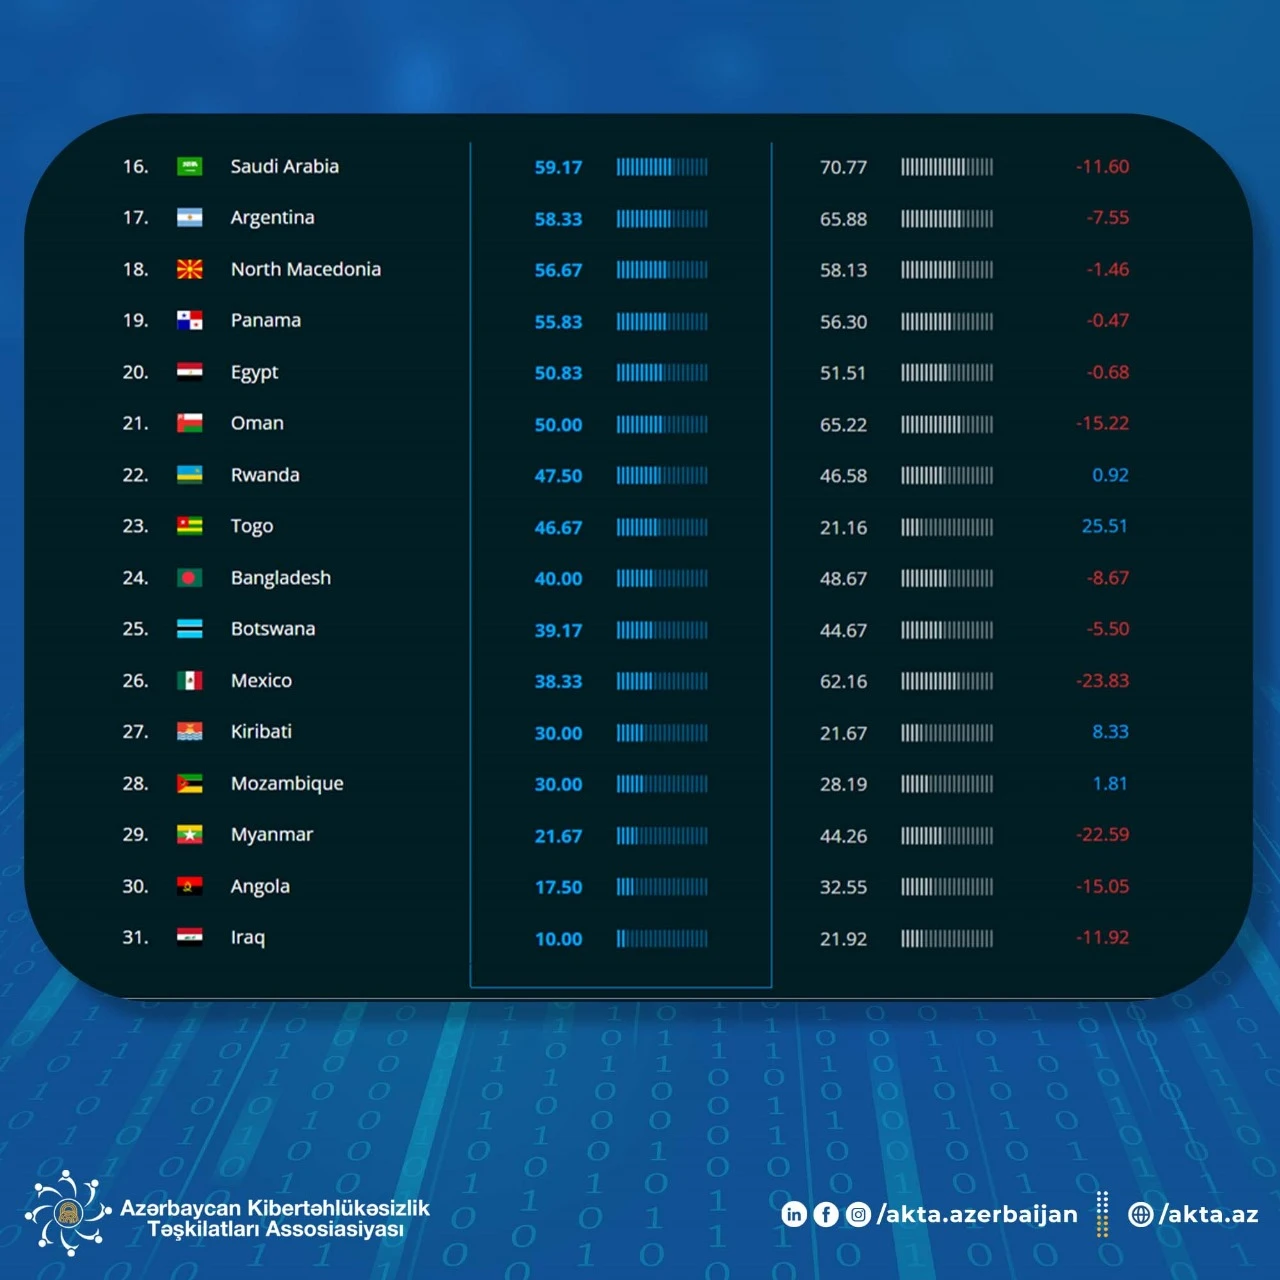 Azerbaijan has achieved the highest indicator in the Cybersecurity Index so far - 1